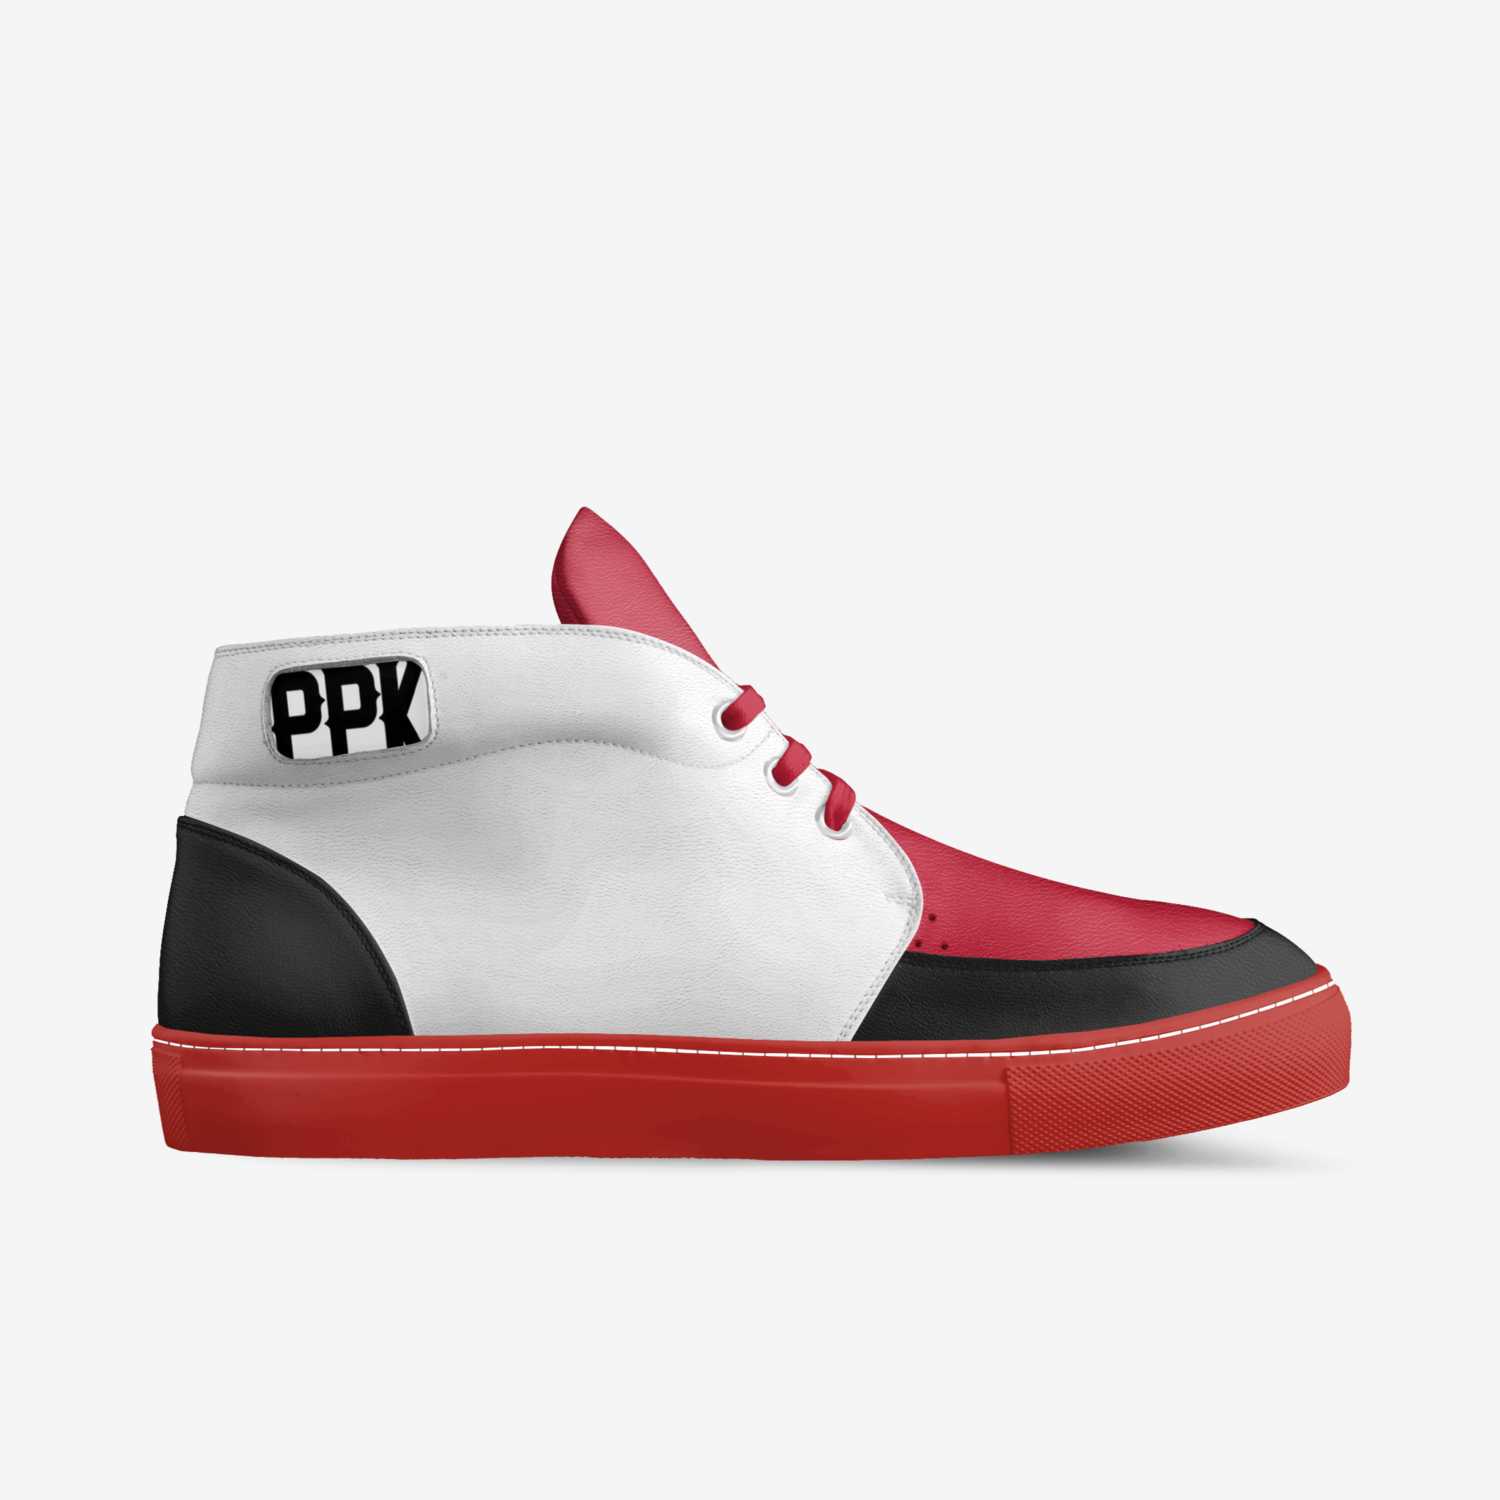 PPK custom made in Italy shoes by Gerald Benton | Side view